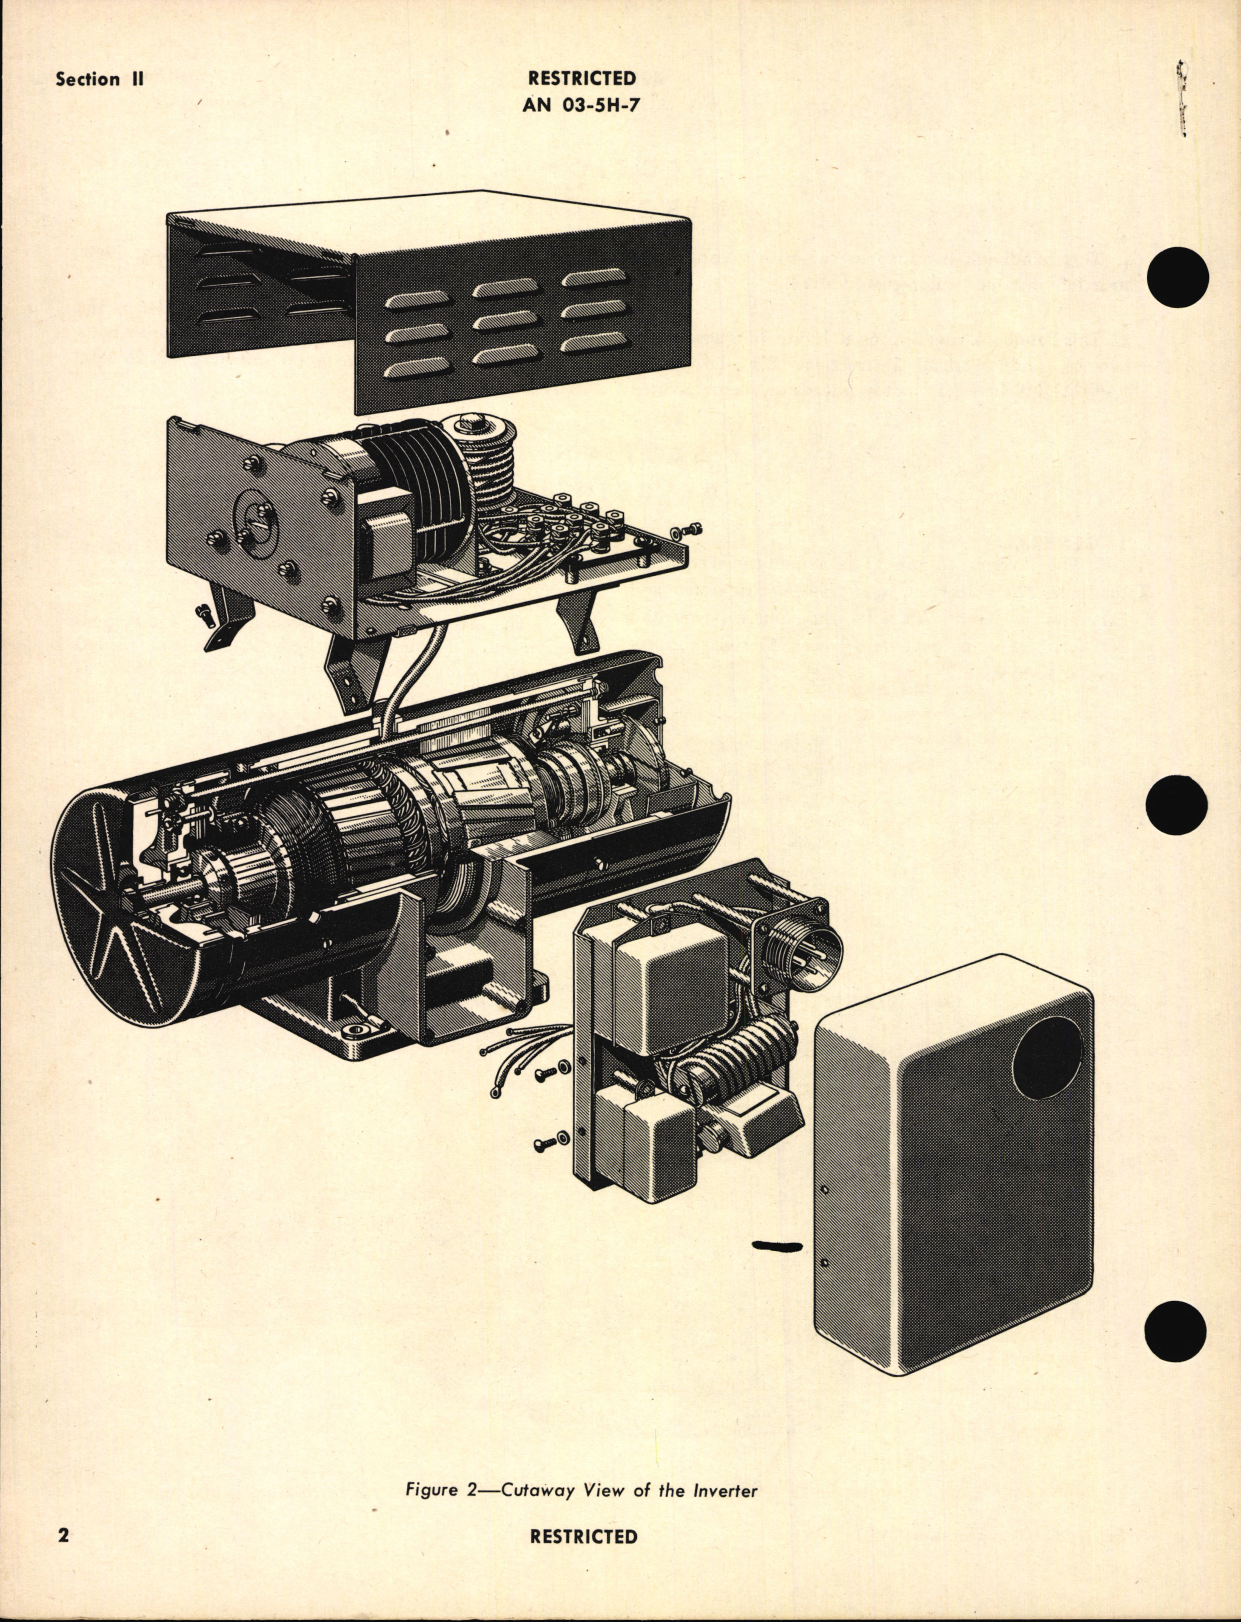 Sample page 6 from AirCorps Library document: Handbook of Instructions with Parts Catalog for Model 5AT121JJ2B Inverter